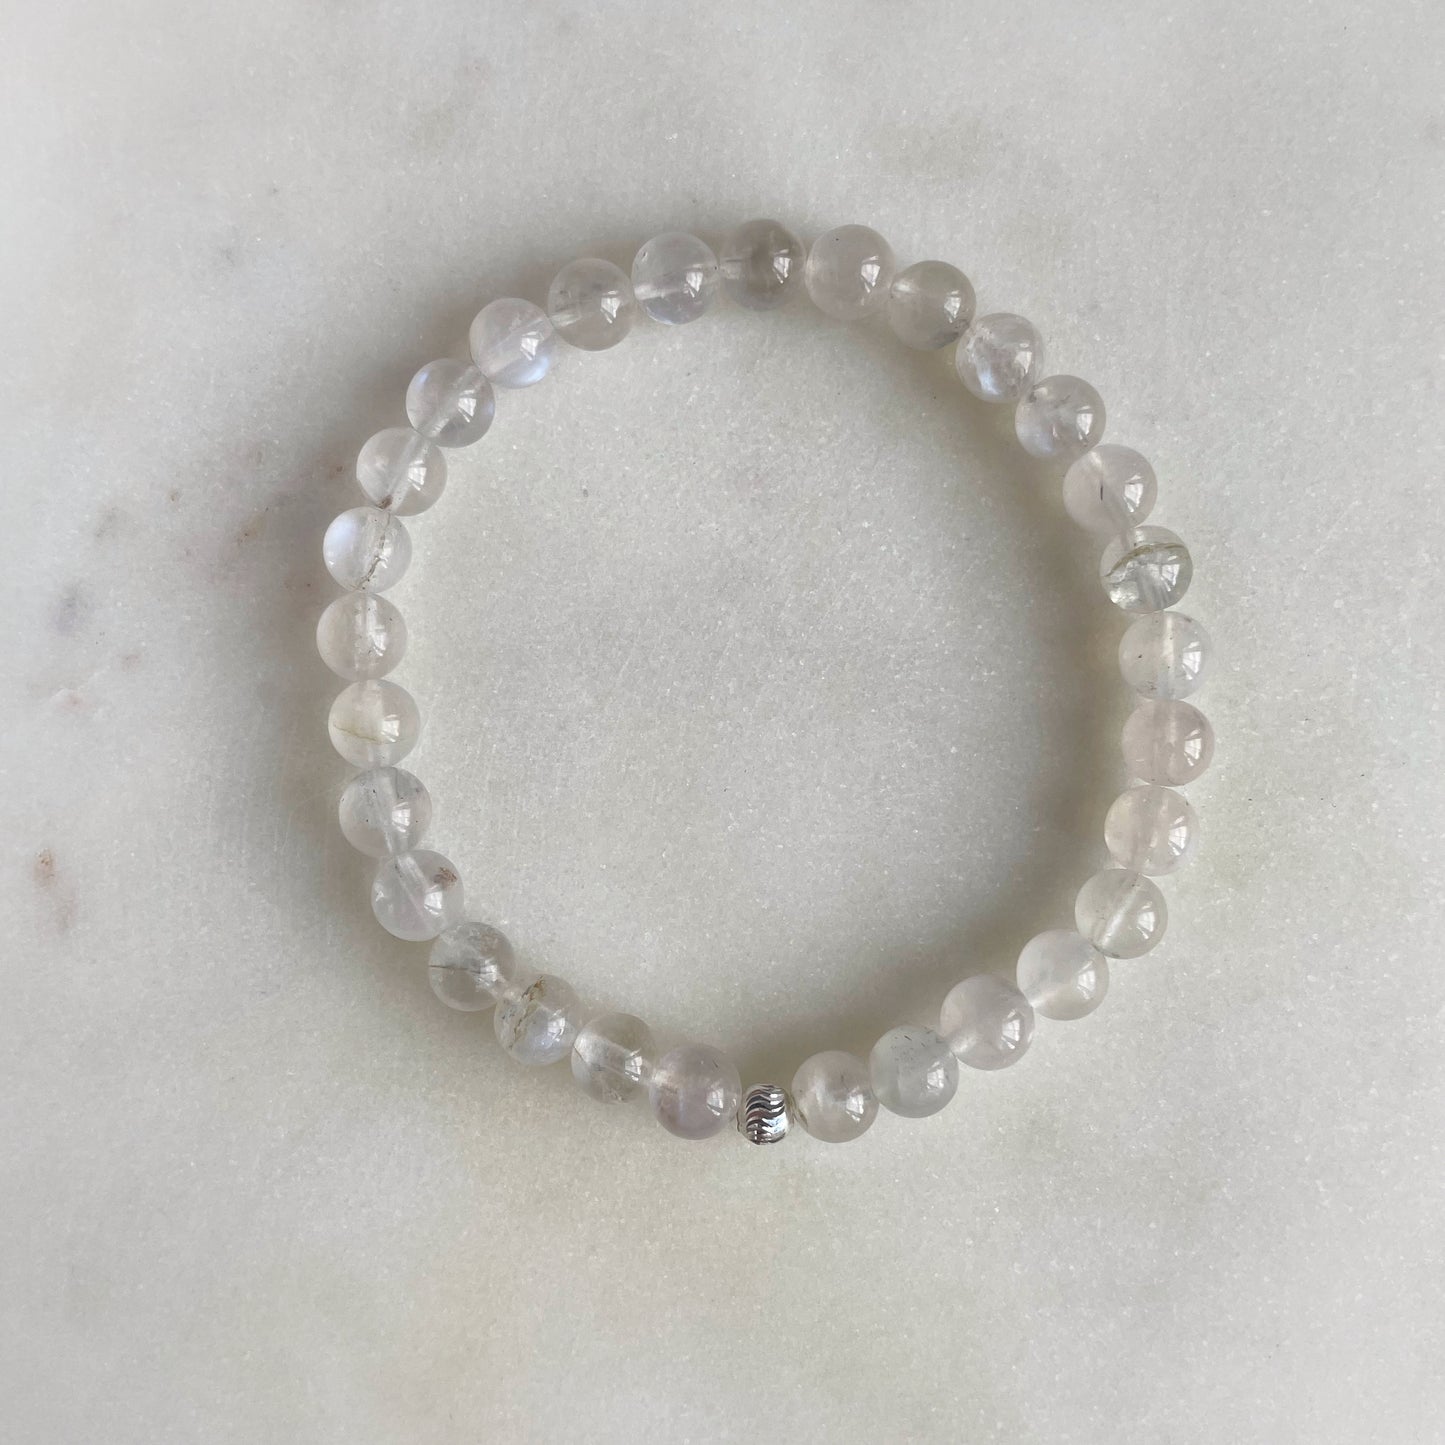 Full Moon - Moonstone bracelet for intuition, harmony and inner growth